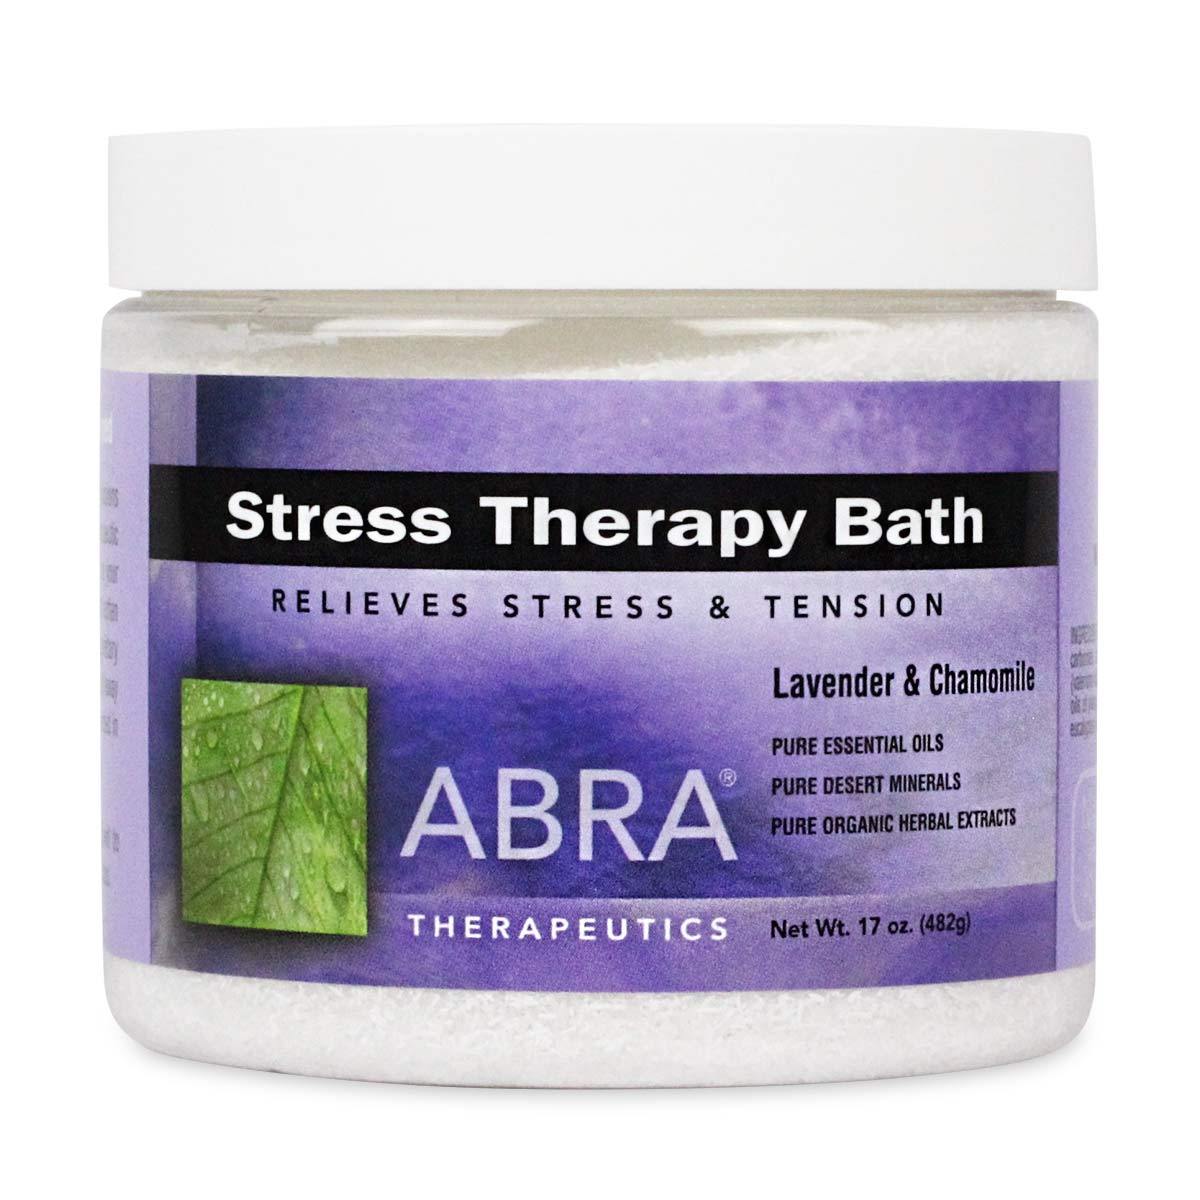 Primary image of Stress Therapy Bath